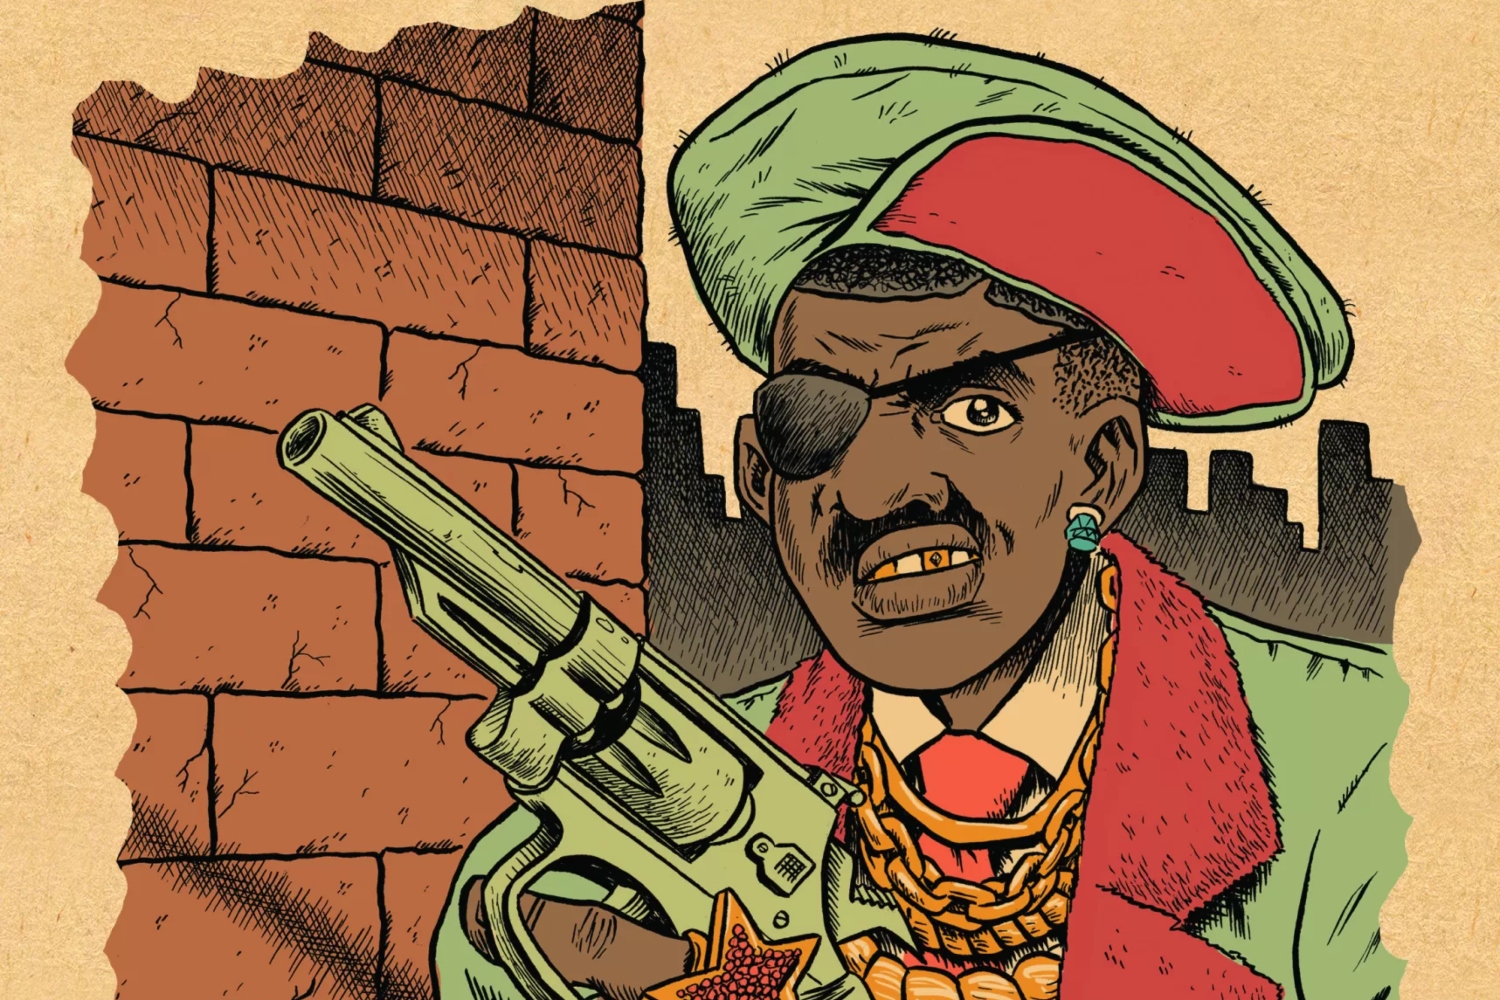 Ed Piskor on 'Hip Hop Family Tree' and its new 10th anniversary omnibus